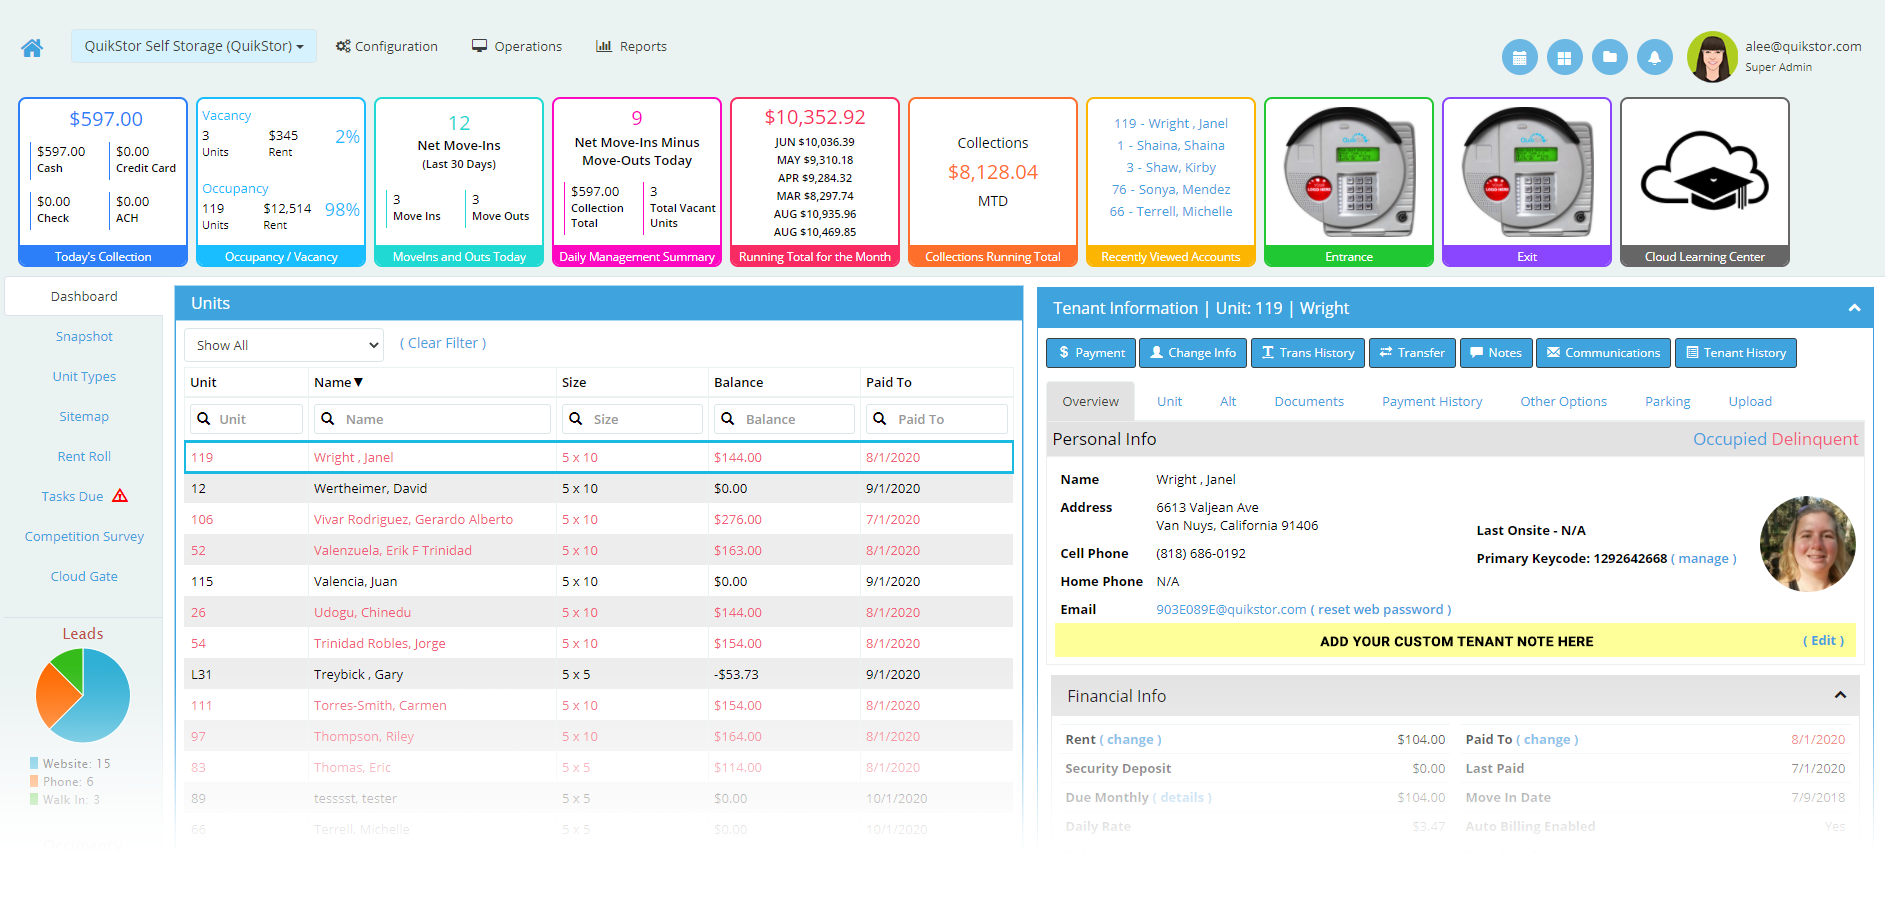 quikstor cloud self-storage management software at-a-glance dashboard